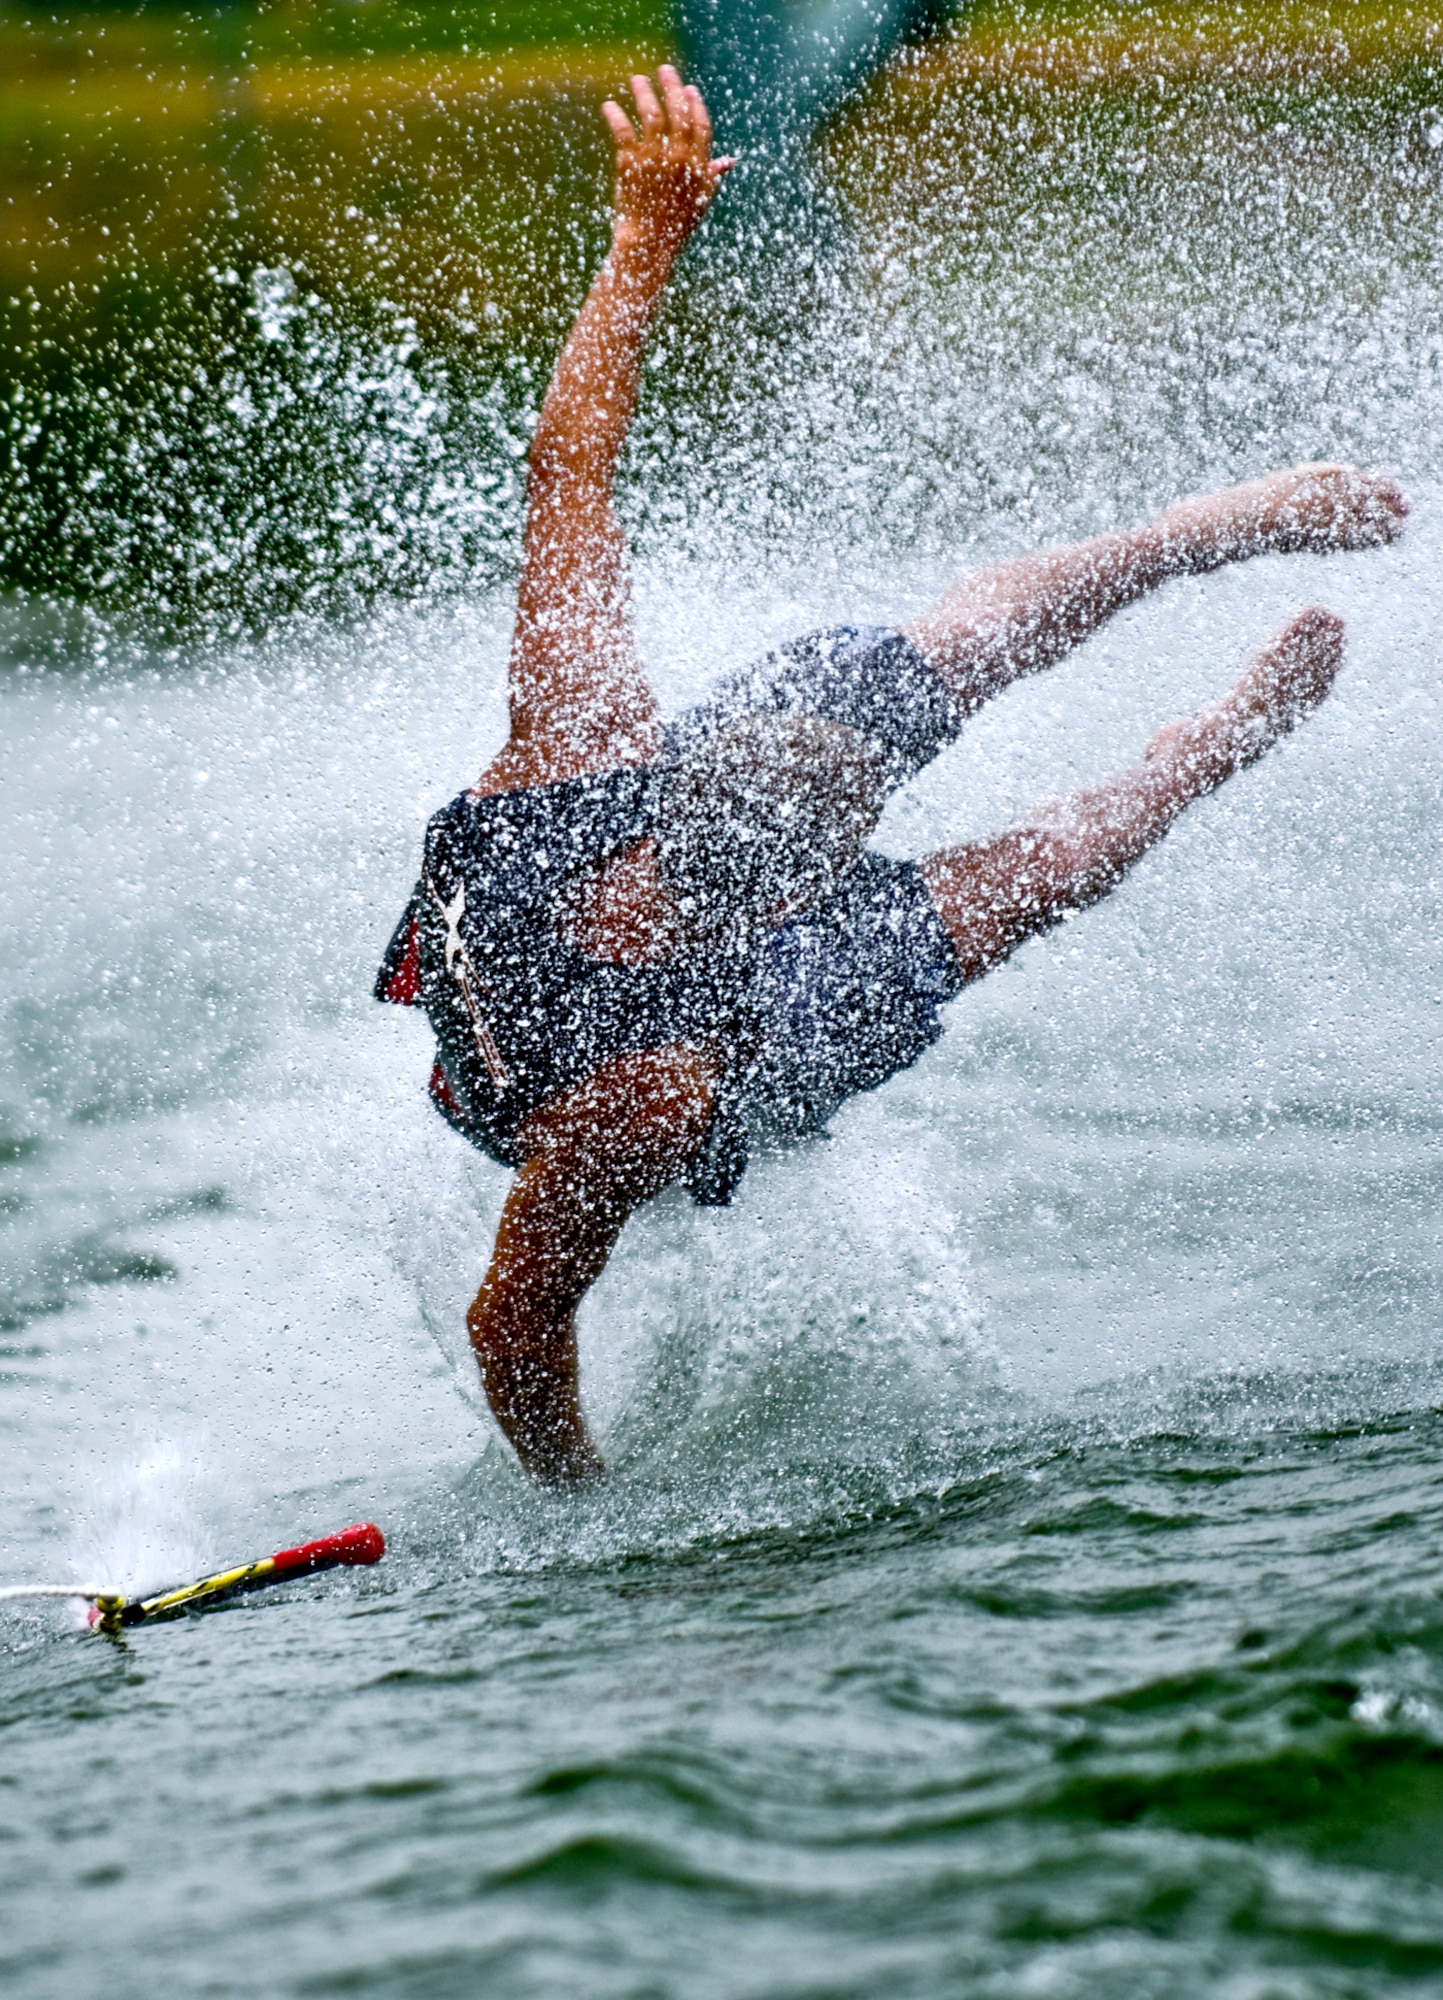 JOE vs. H2O - If you fall while water-skiing, relax! Try to make a smooth water entry. Never tumble forward over the top of your skis. (photo by Tech. Sgt. Matthew Hannen)